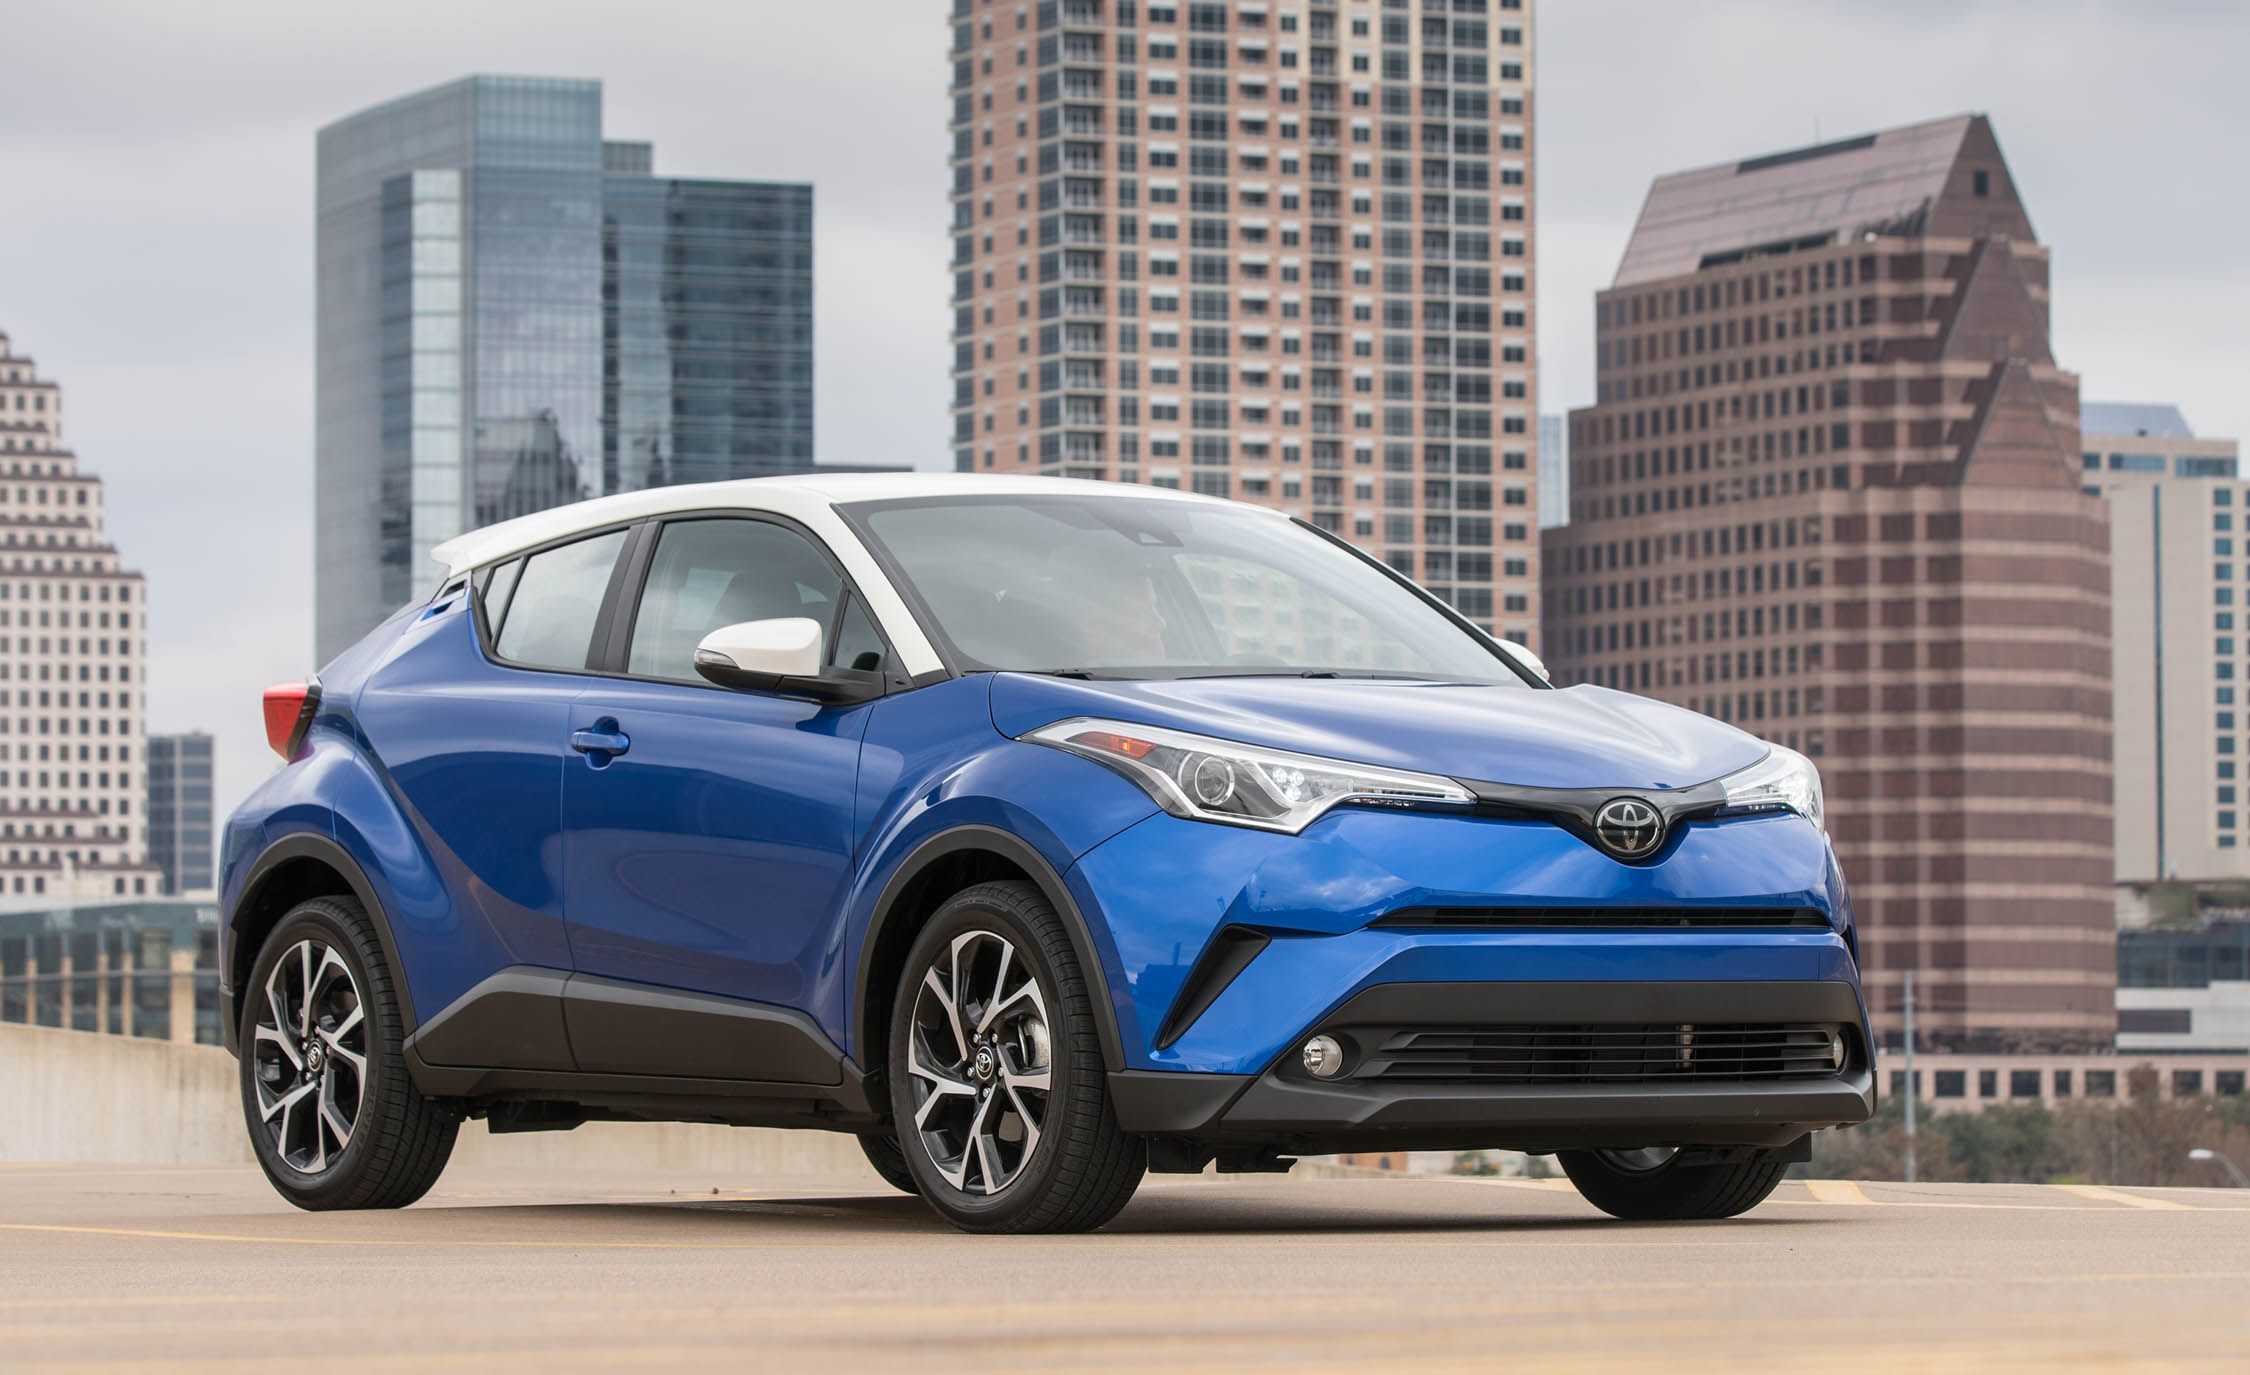 2018 Toyota C HR Blue Exterior Front And Side (View 1 of 33)